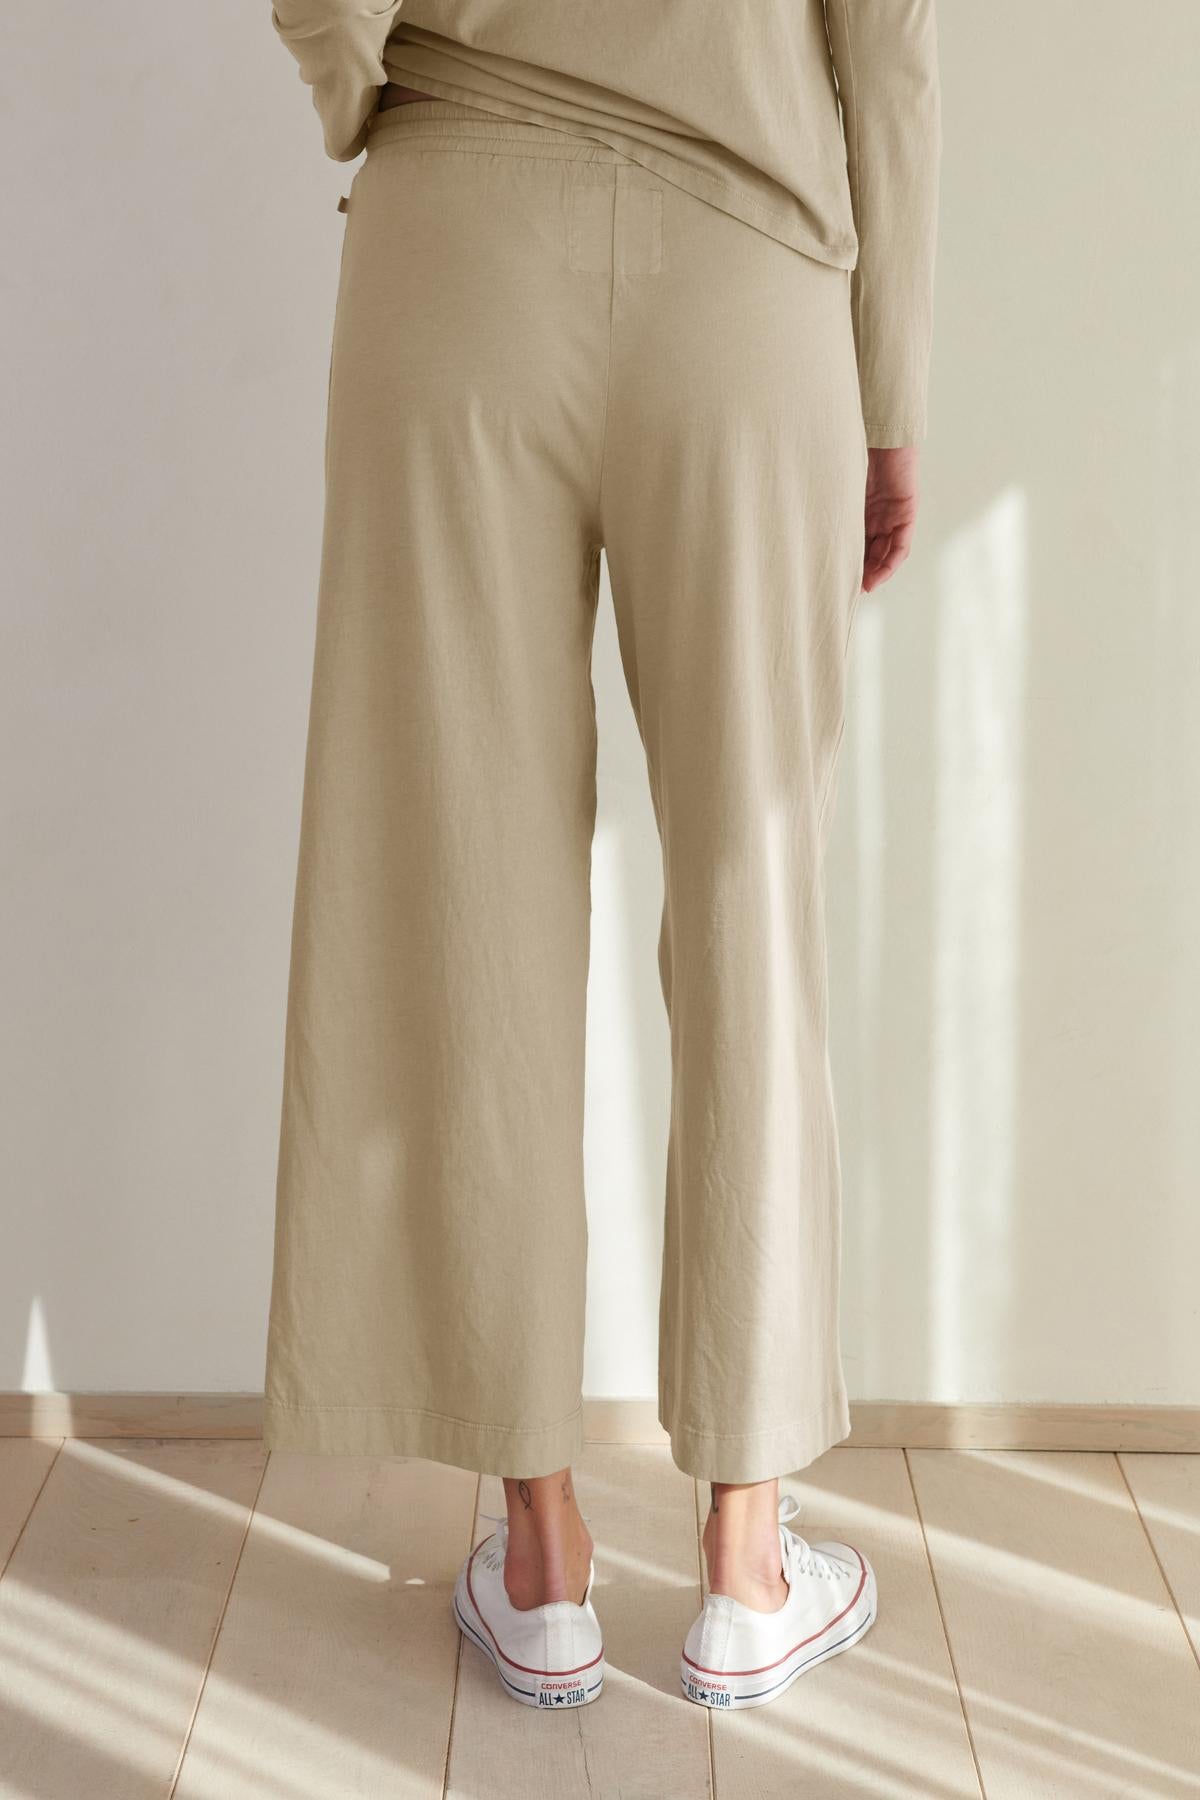 Person standing in a room wearing Velvet by Jenny Graham's PISMO PANT straight leg pants and a matching top with white sneakers.-36463776563393